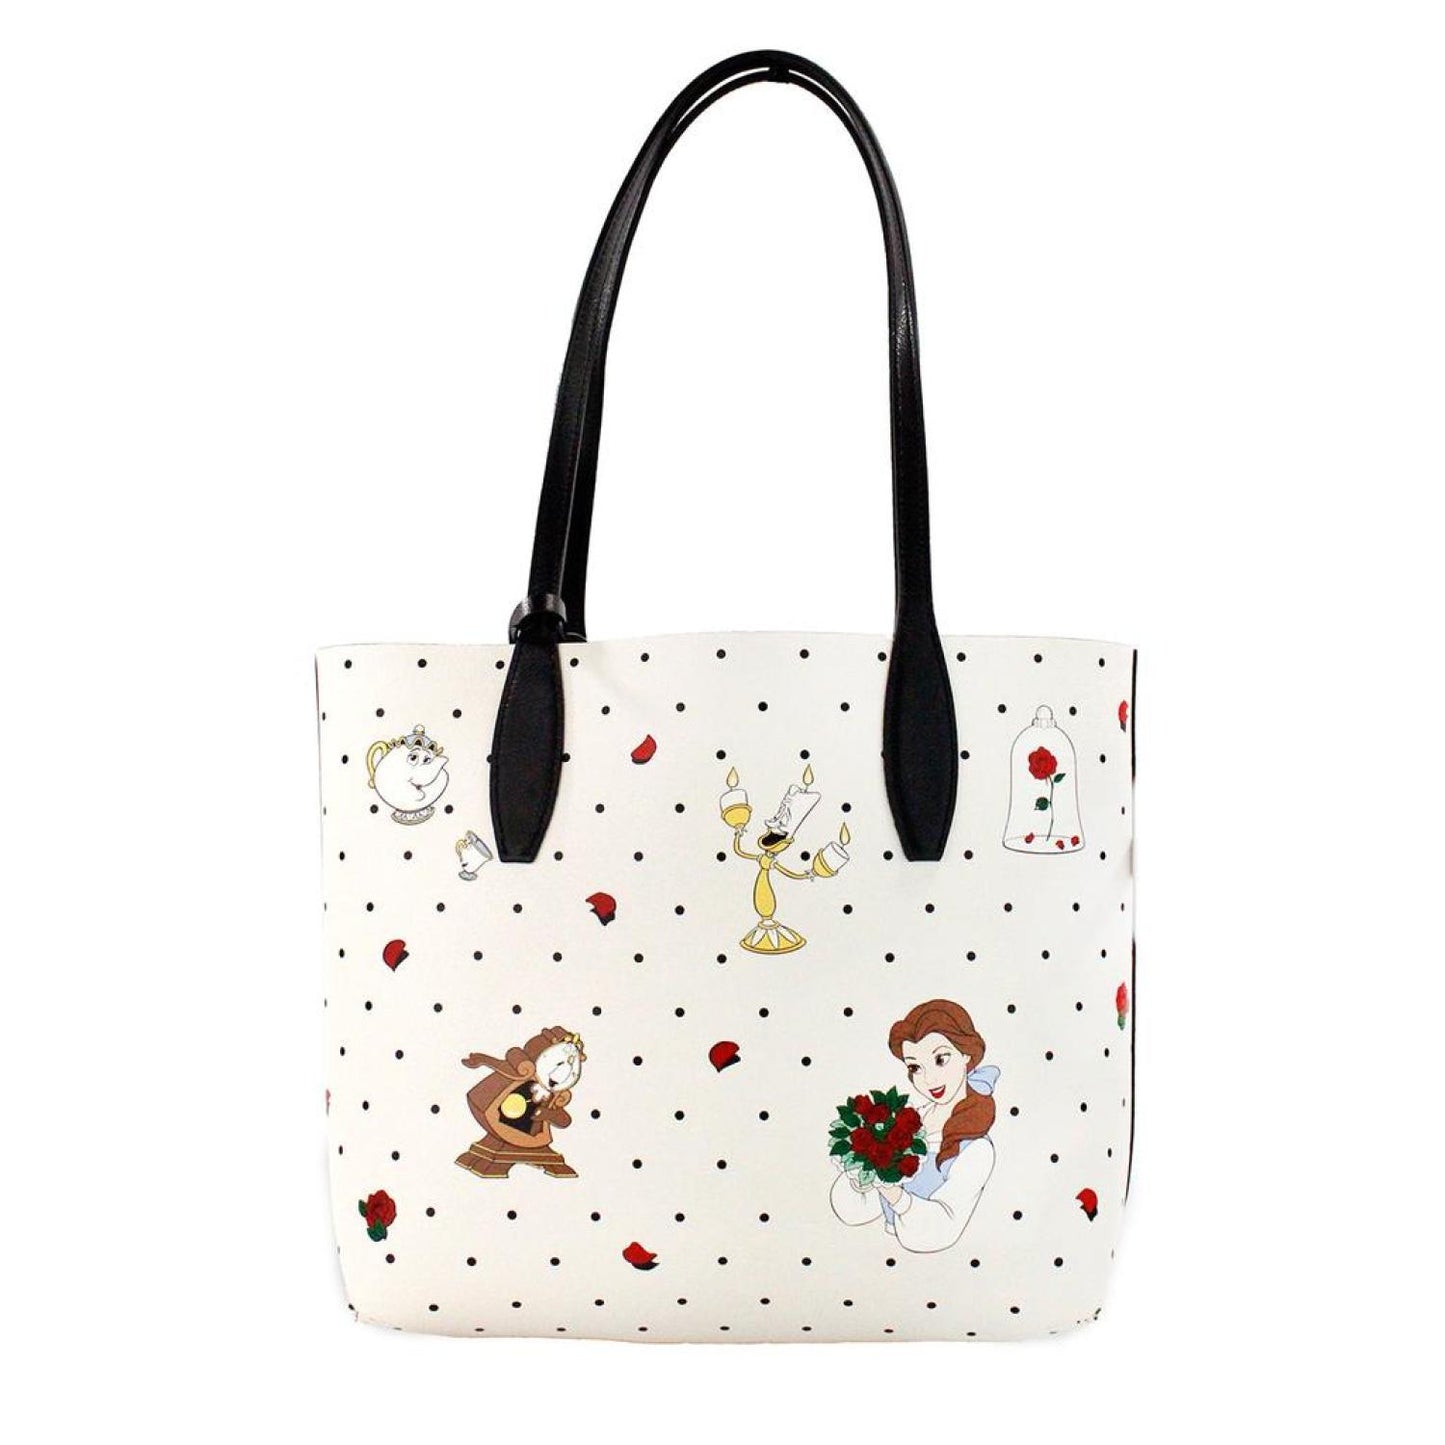 Kate Spade Disney Beauty And The Beast Small Leather Reversible Tote Women's Handbag